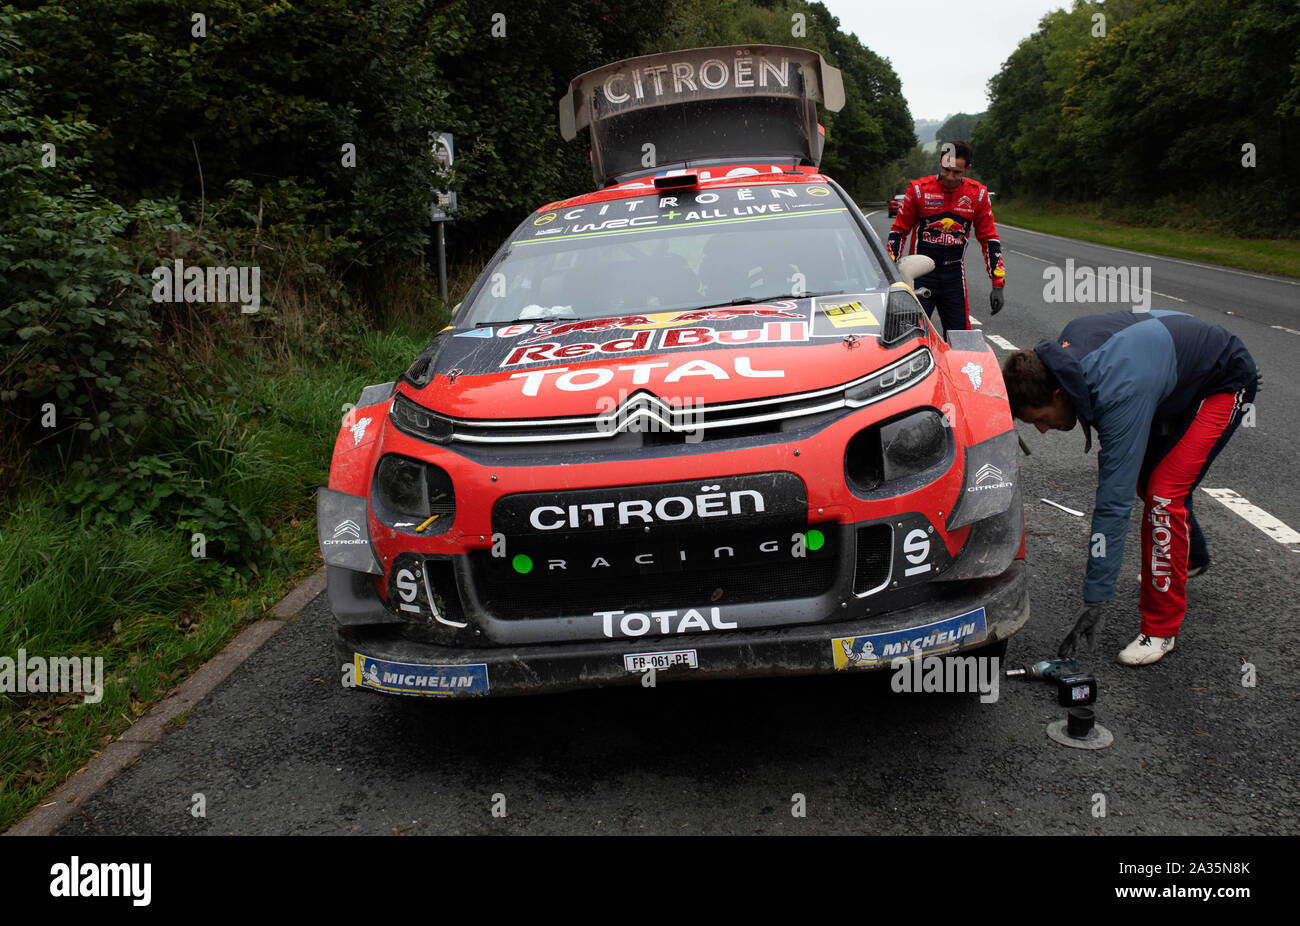 , Powys, Wales, UK. 05th Oct 2019. Wales Rally GB 2019, Seb Ogier and Juien Ingrassia, tyre change on the A470 at Llanidloes, Newtown, Powys, Wales, Alamy Lives News/Bob Sharples Credit: Bob Sharples/Alamy Live News Stock Photo